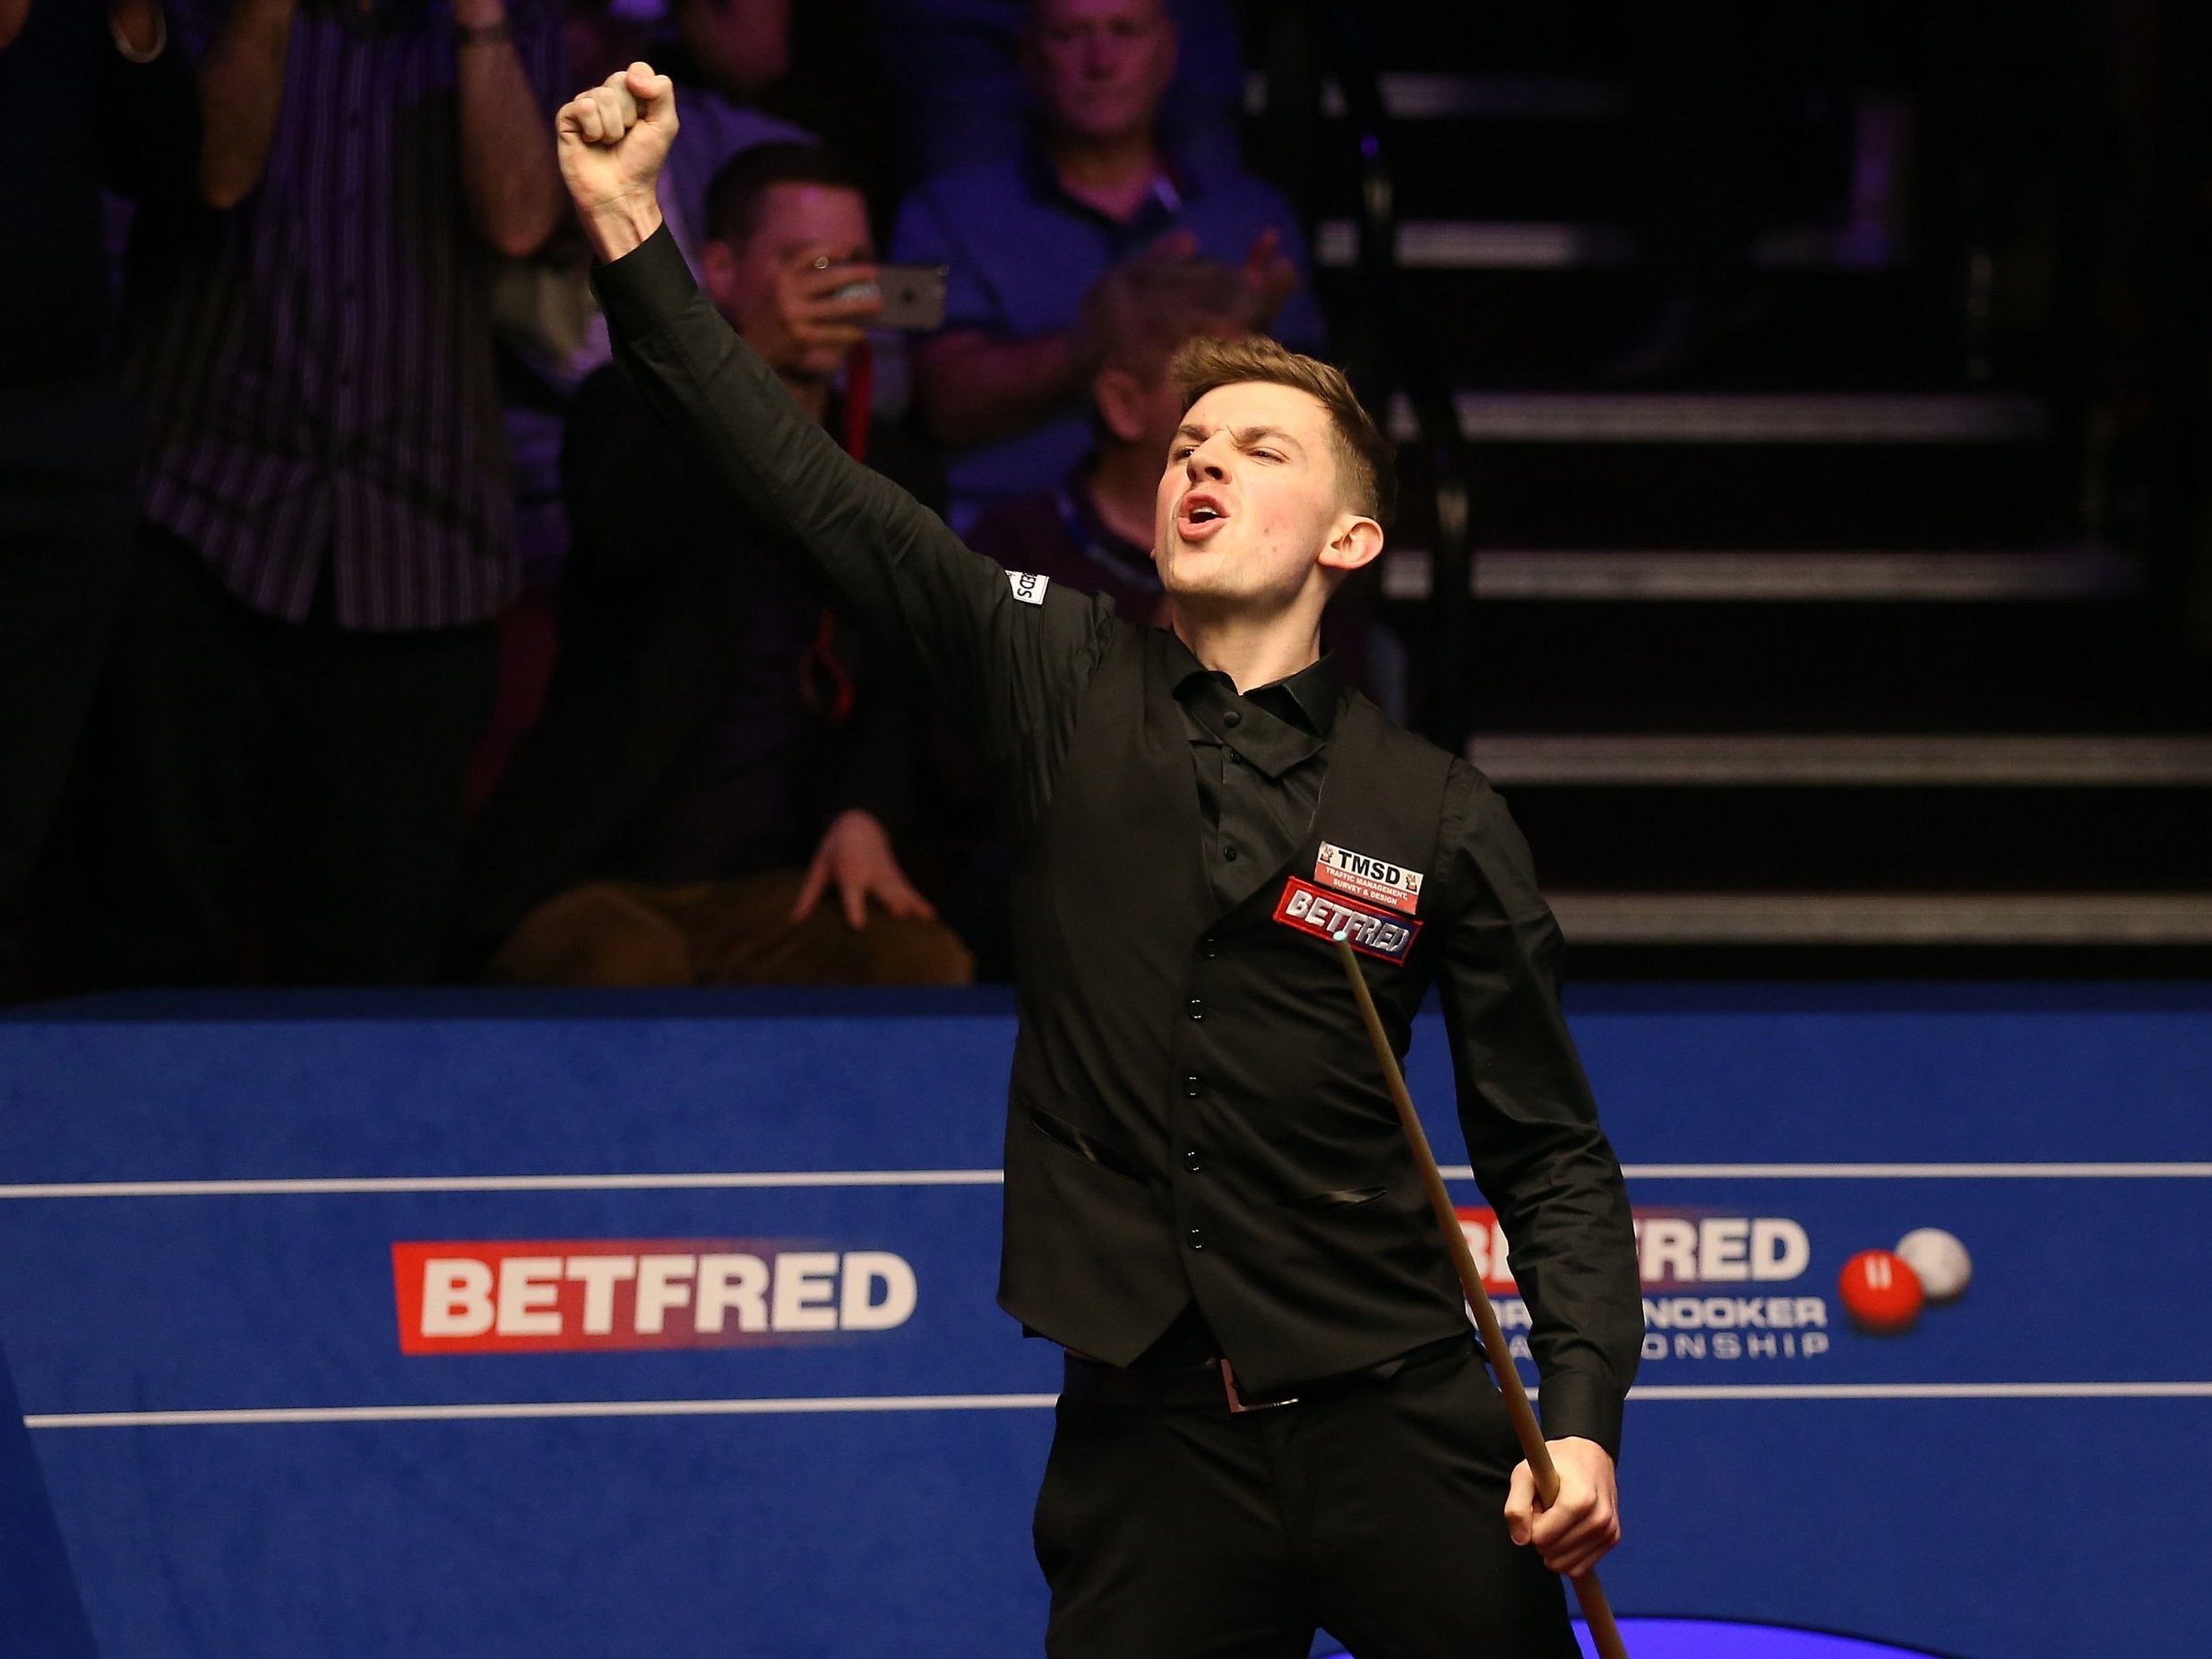 James Cahill celebrates his victory over O'Sullivan at the World Snooker Championship